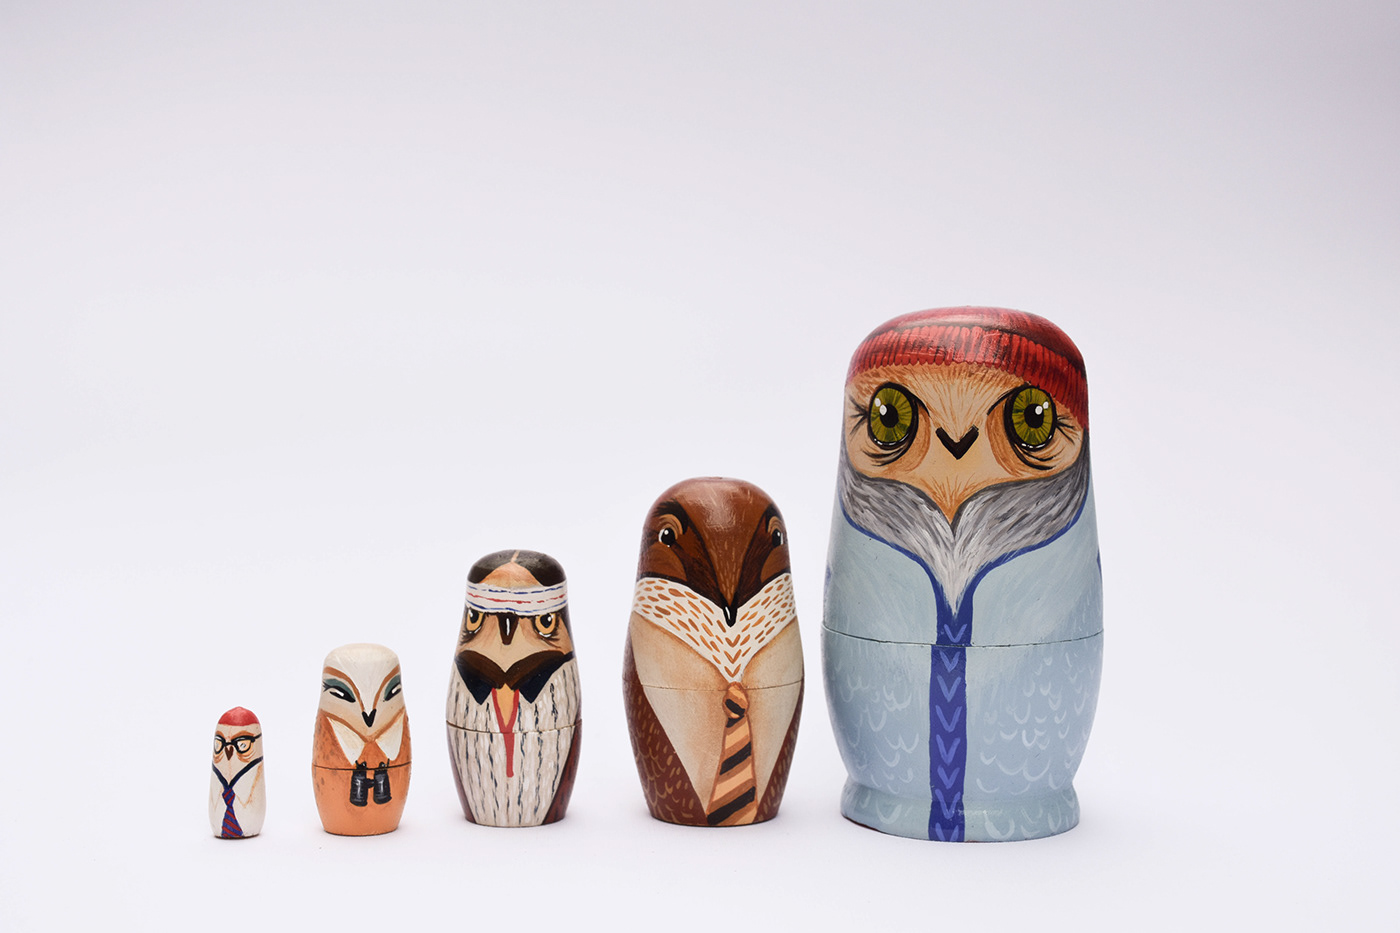 wes anderson russian owl caleigh ill stacking doll nesting doll owl matryoshka set matryoshka owl wes anderson theme